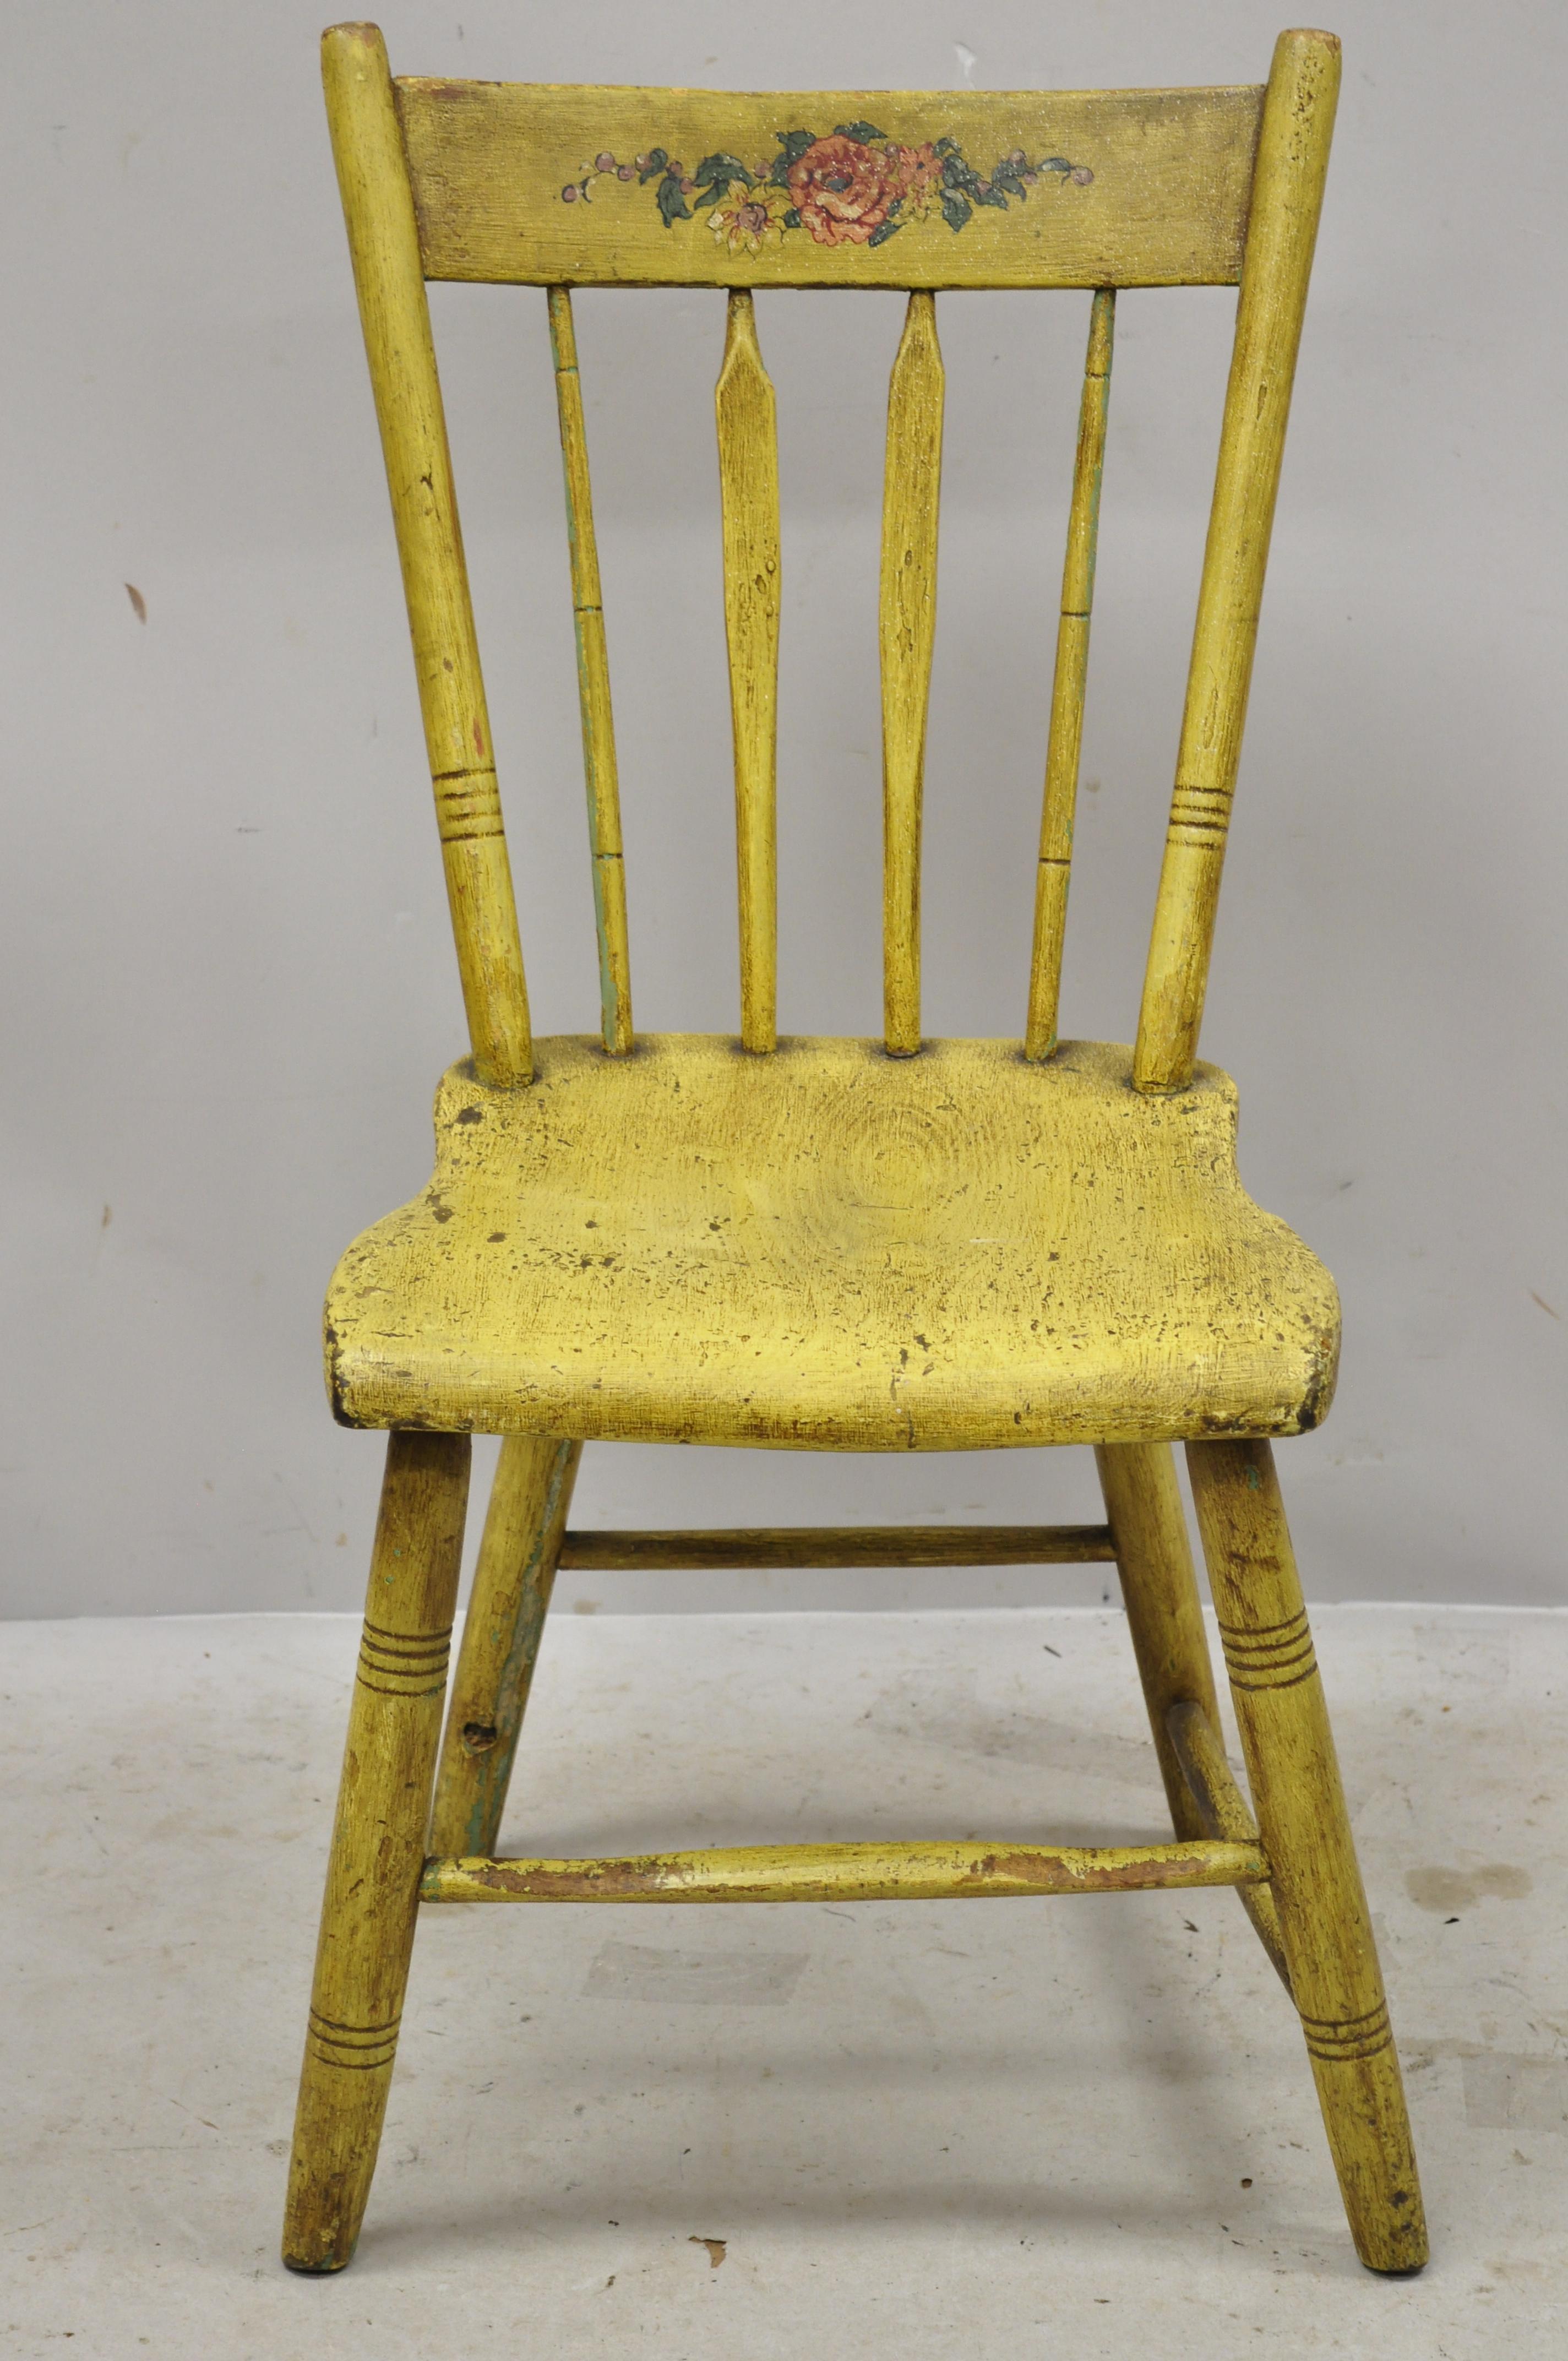 Frederick Loeser & Co yellow American Primitive Hitchcock style painted side chair (B). Item features floral painted backrest, spindle back, carved stretcher base, remarkable patina, solid wood frames, yellow distressed finish, very nice antique